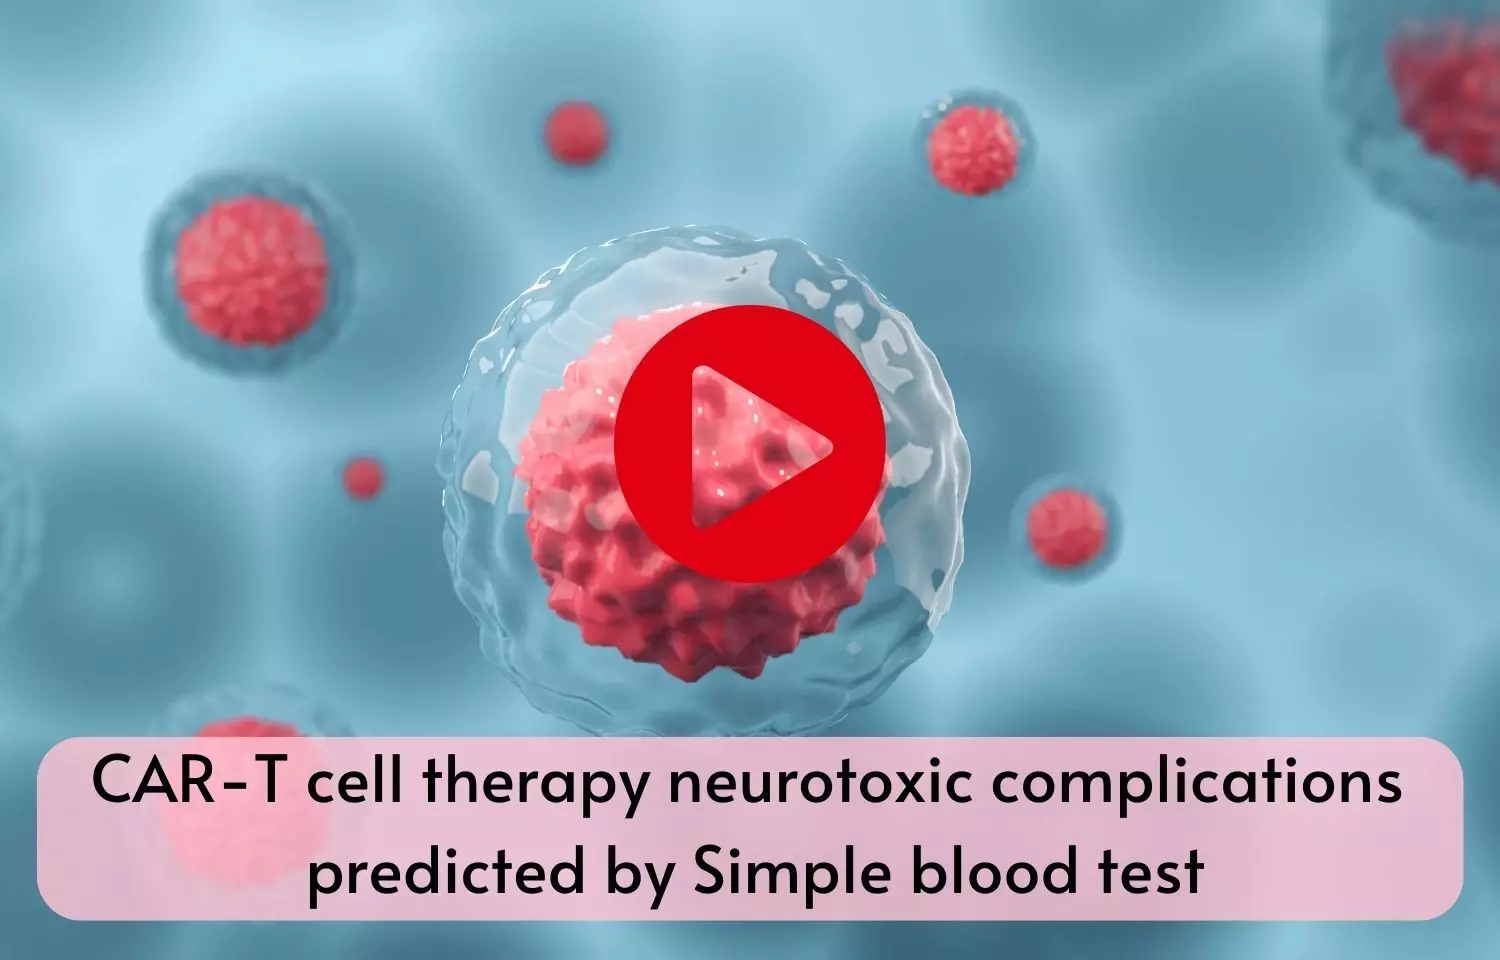 CAR-T cell therapy neurotoxic complications predicted by Simple blood test